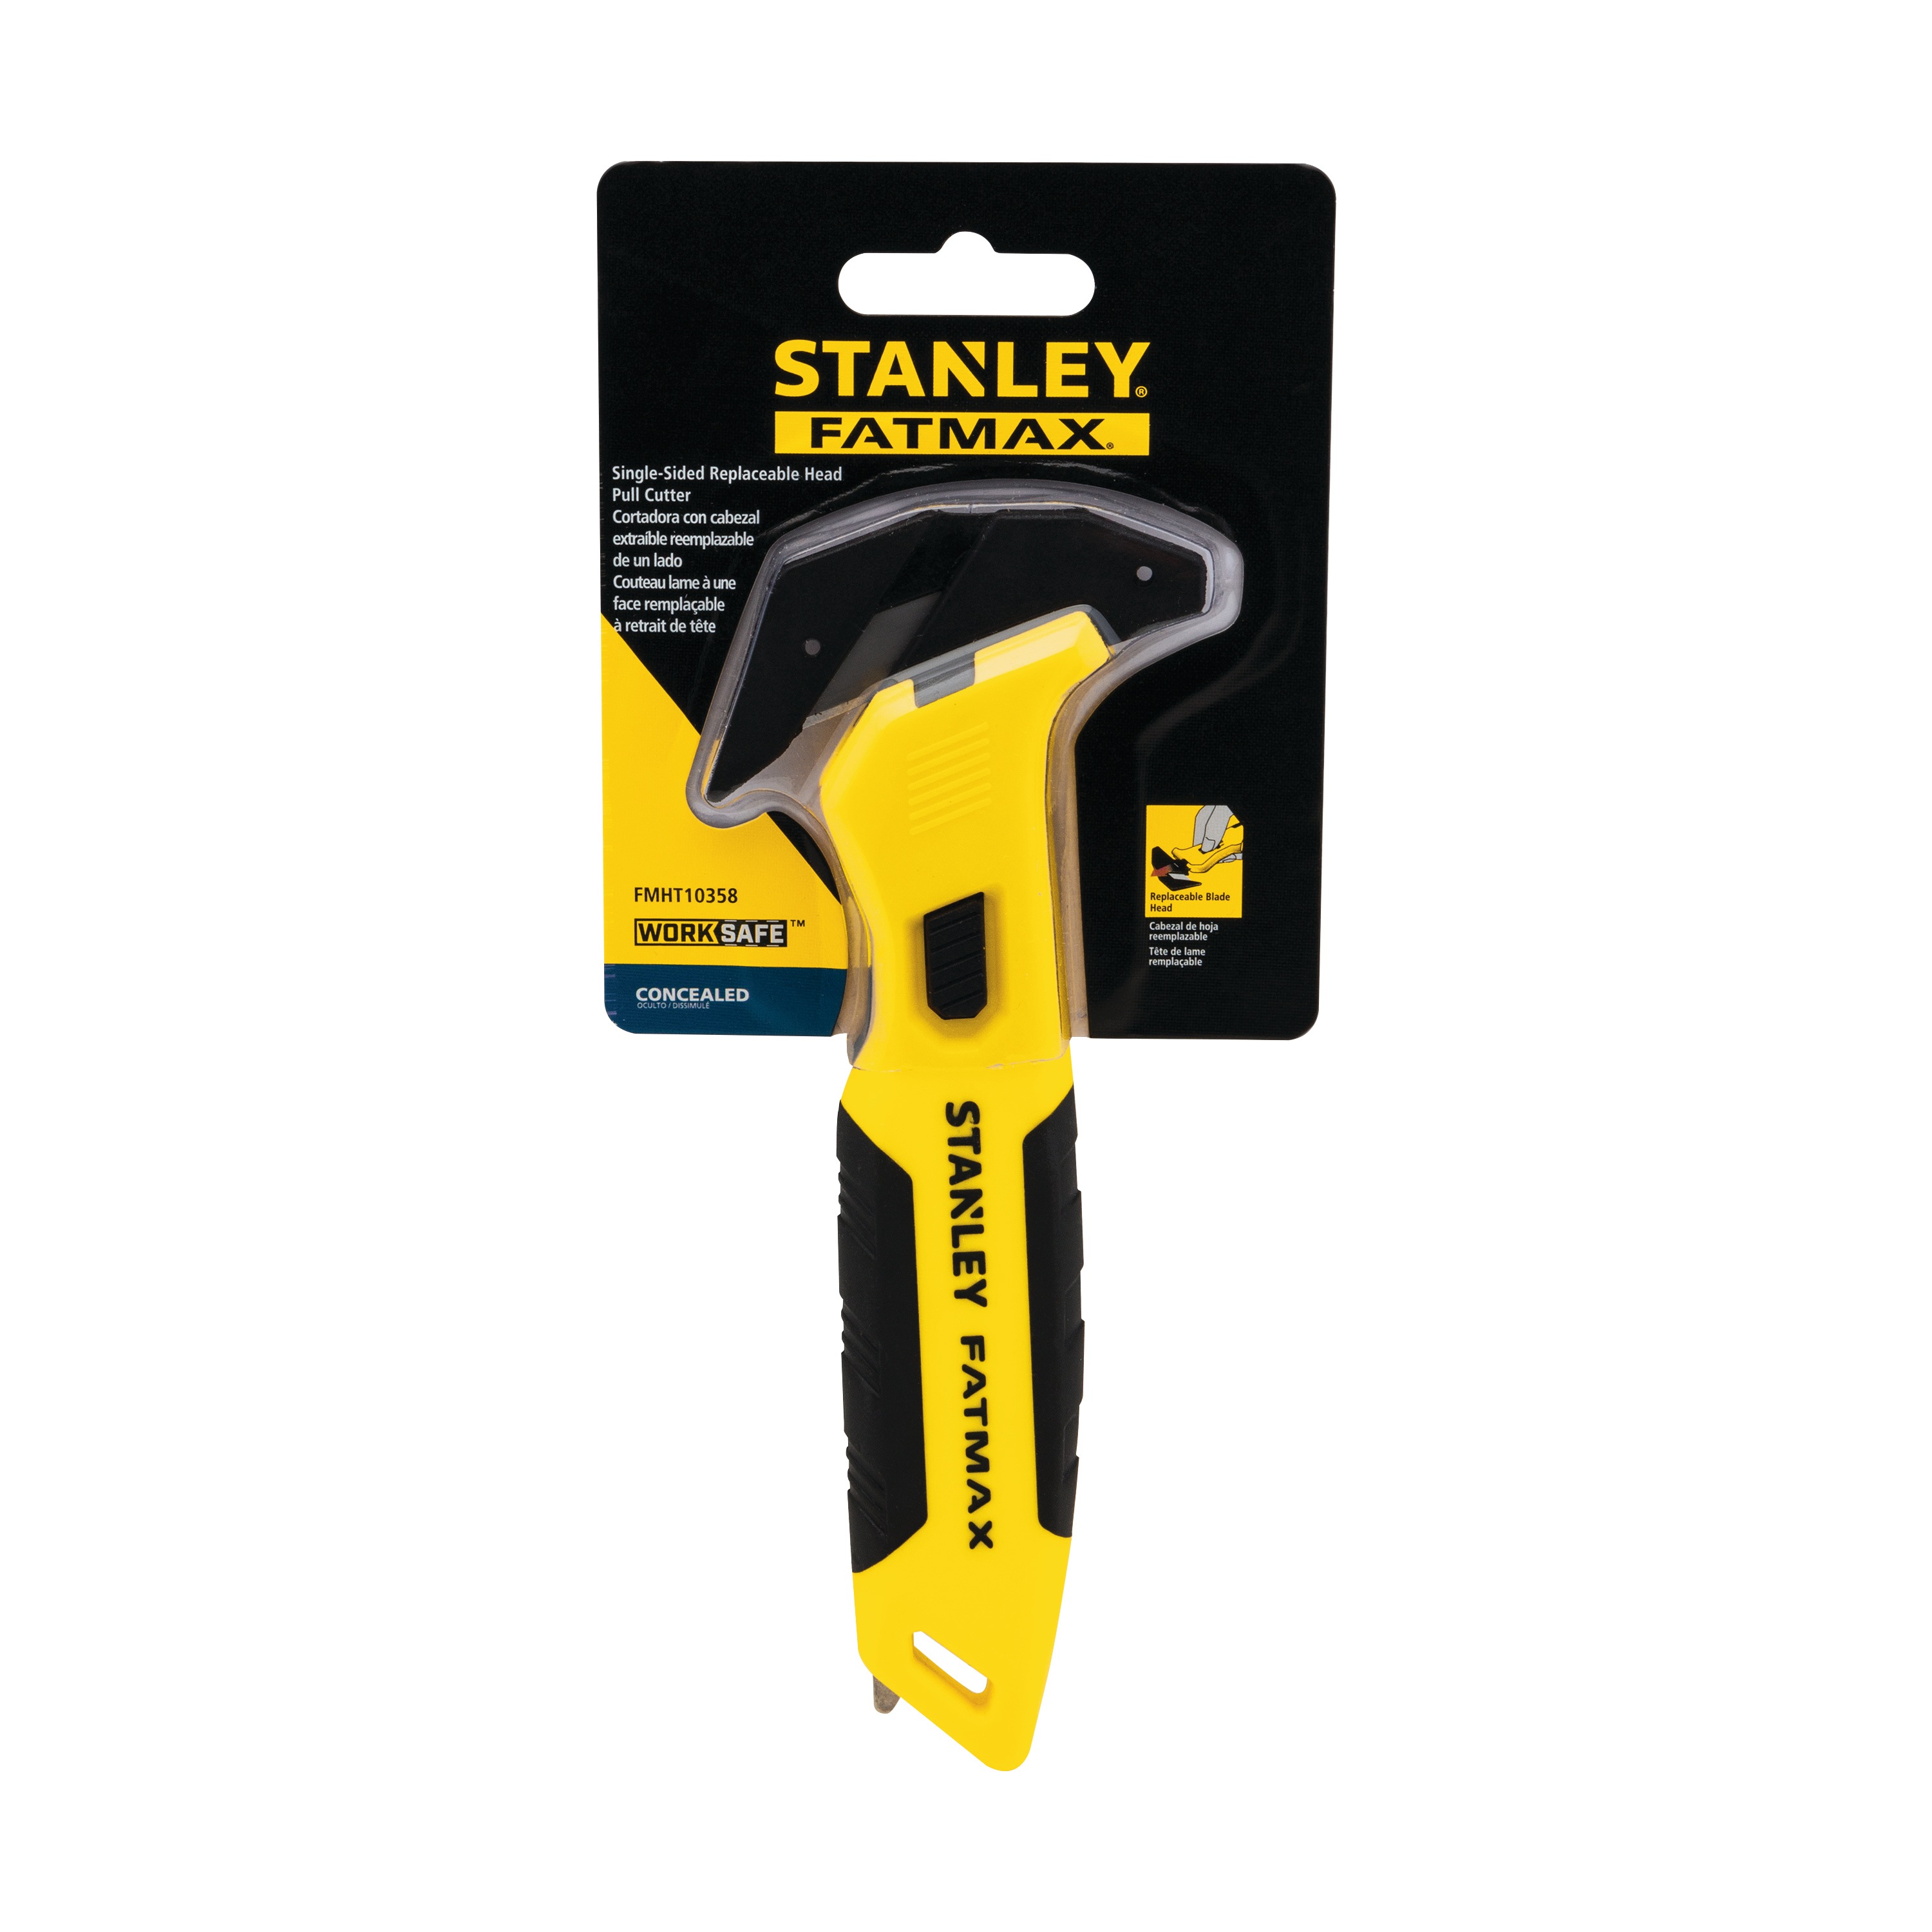 Stanley Tools - FATMAX SingleSided Replaceable Head Pull Cutter - FMHT10358